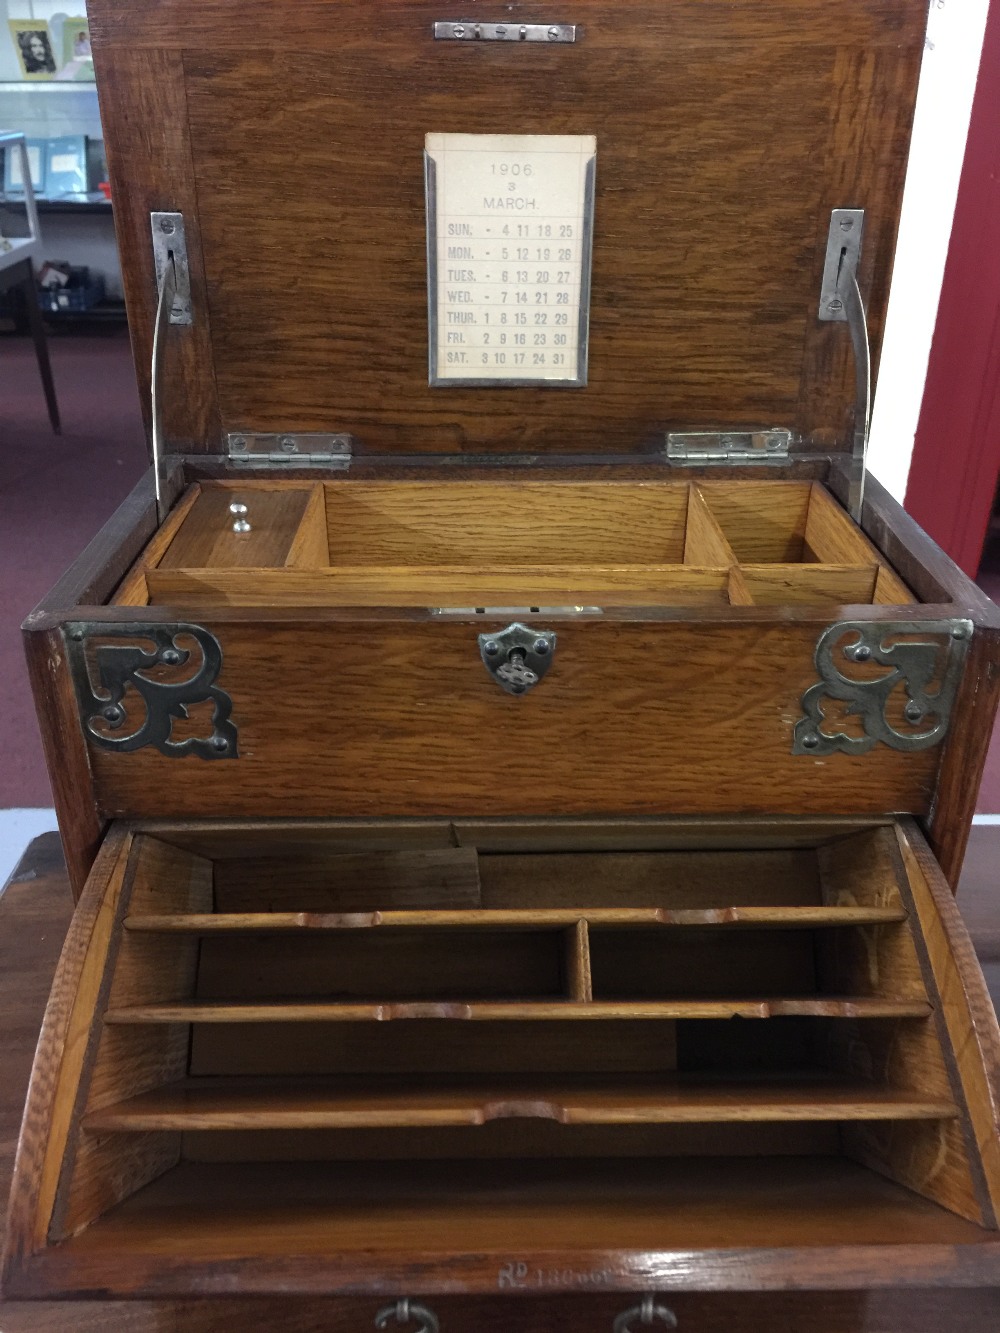 Early 20th cent. Oak stationery box, lockable lid opening to reveal compartments for pens ink and - Image 2 of 2